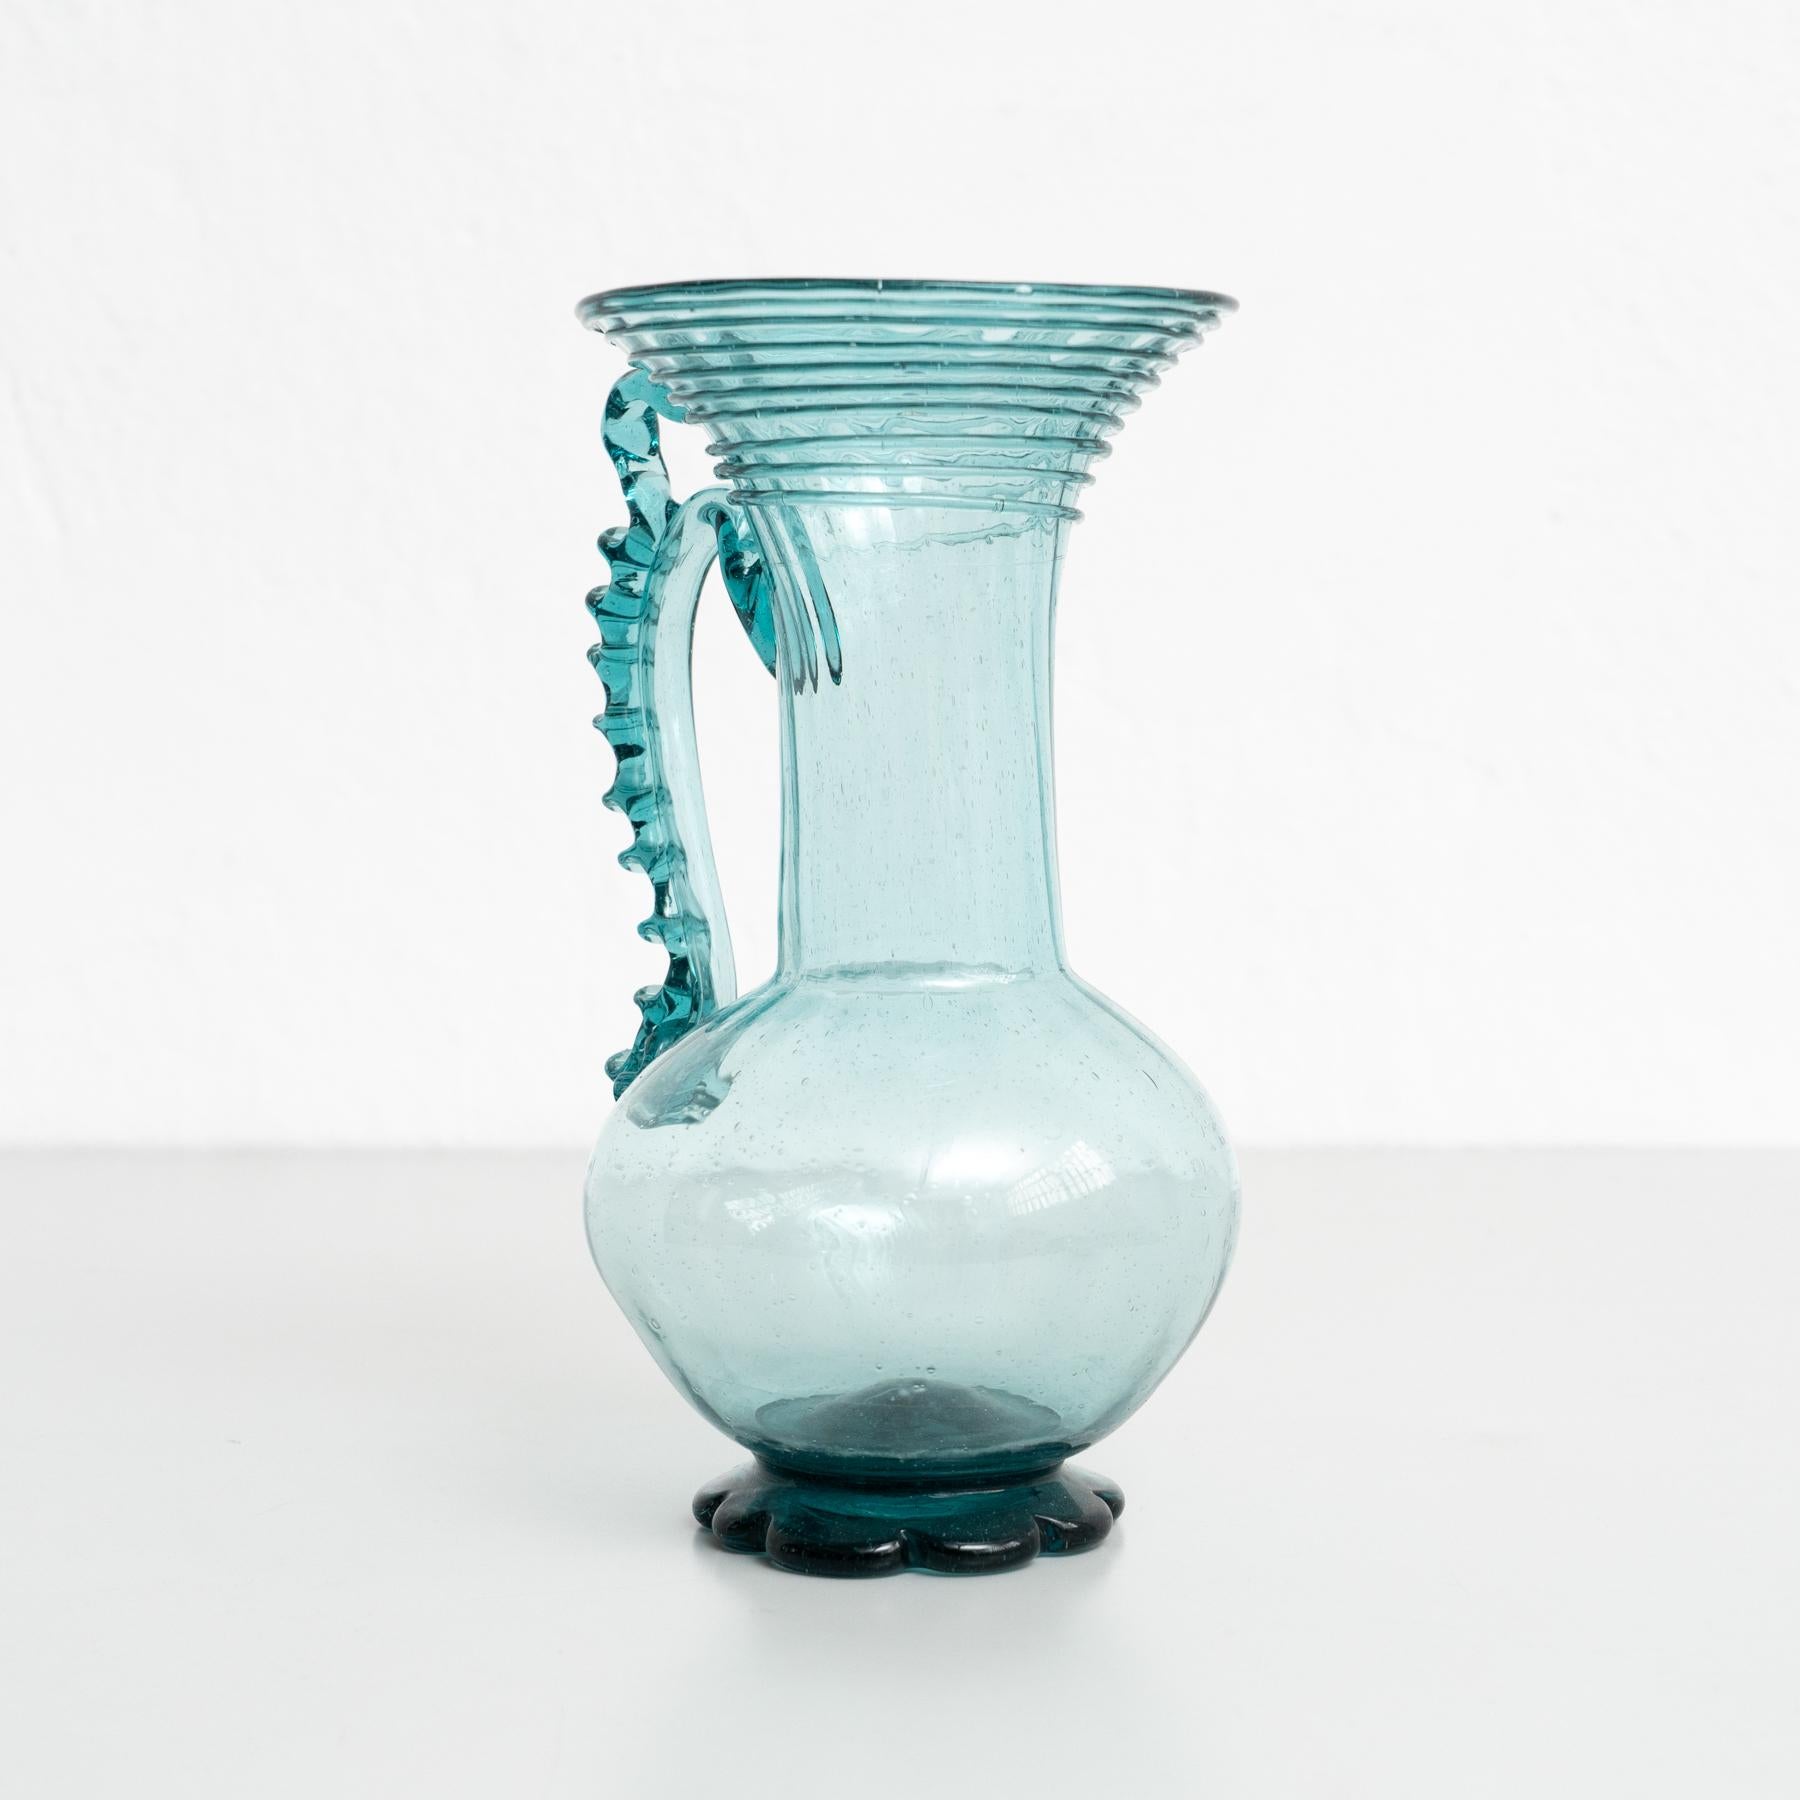 Exceptional Blown Glass Vase - Early XXth Century - Spanish Craftsmanship For Sale 6